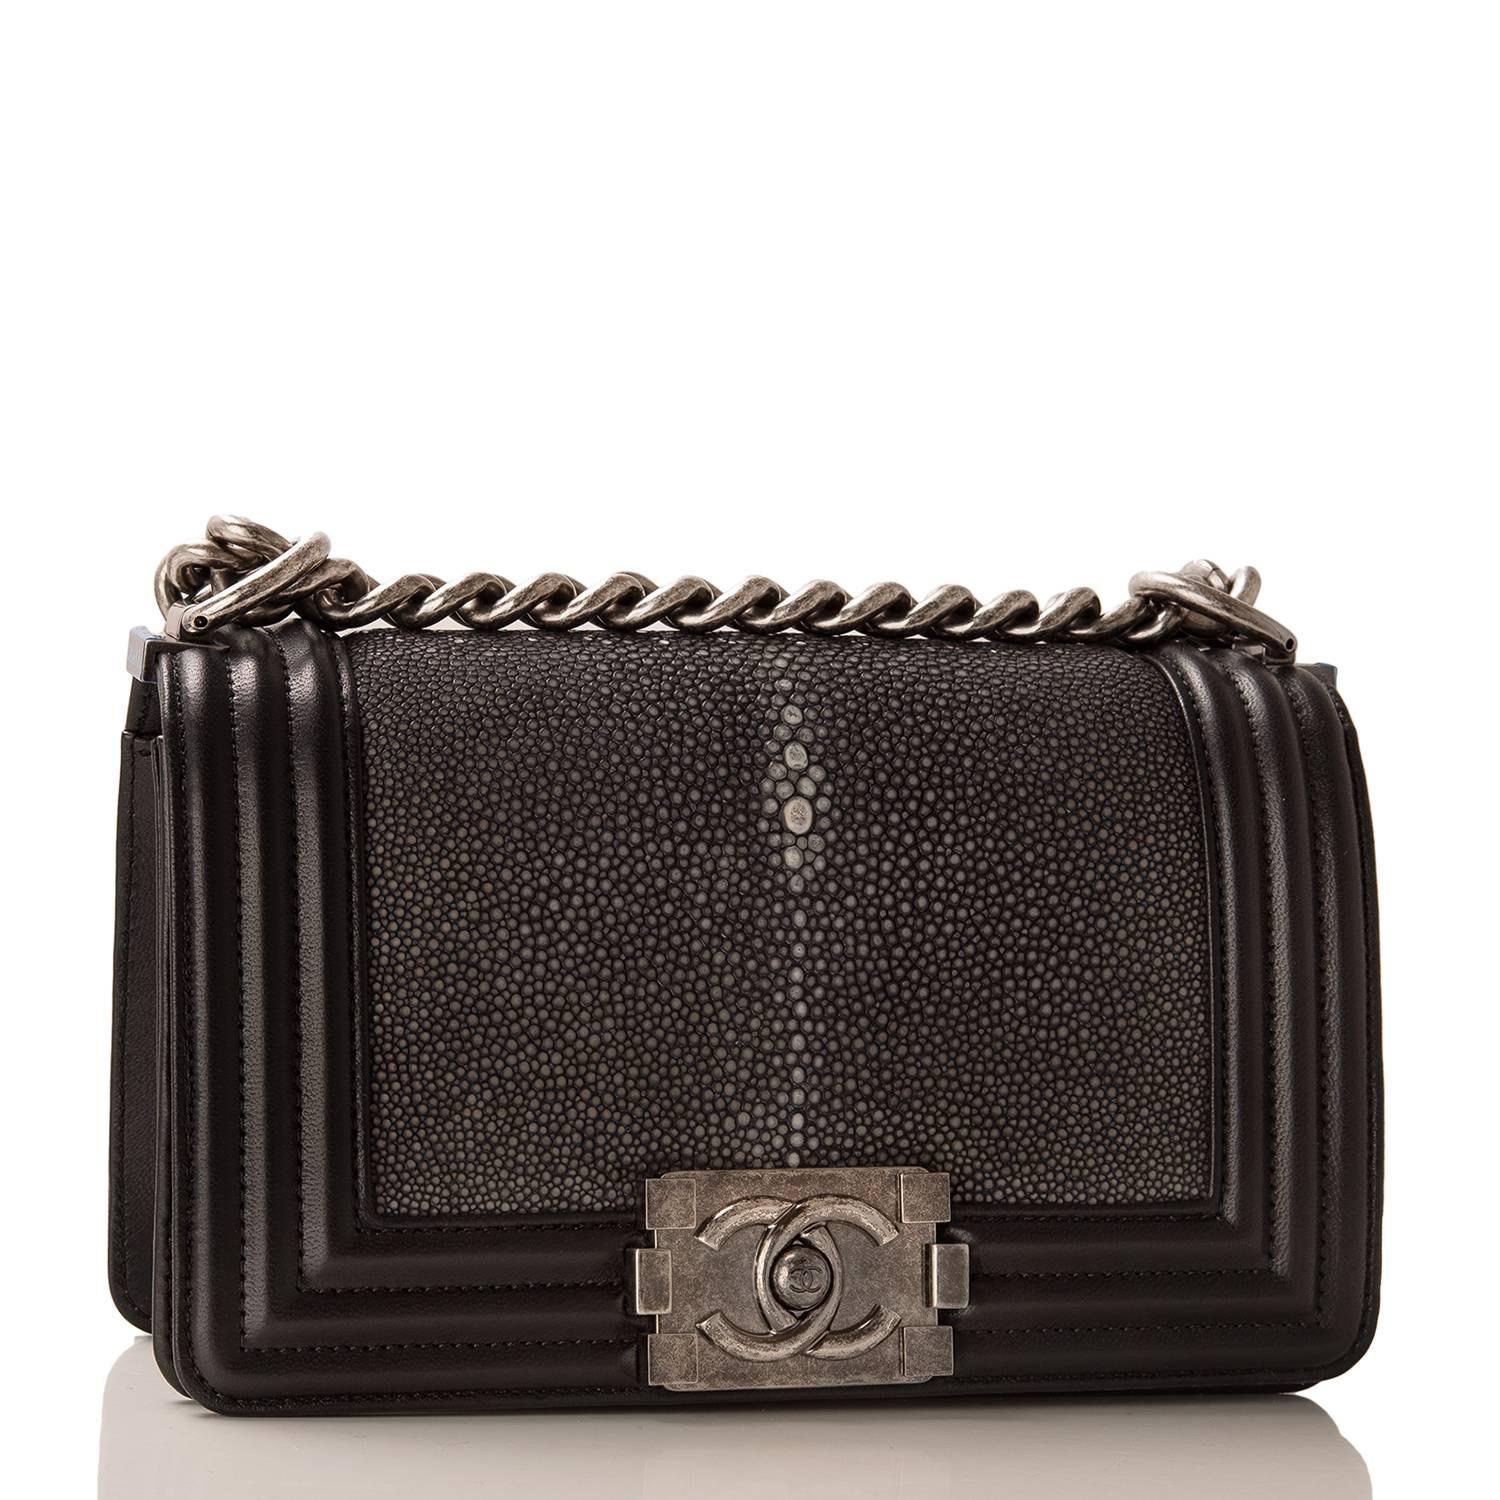 Chanel Small Boy bag of black stingray and lambskin leather with aged ruthenium hardware.

The bag has a full front flap with the Boy Chanel signature CC push lock closure and an aged ruthenium chain link and black leather padded